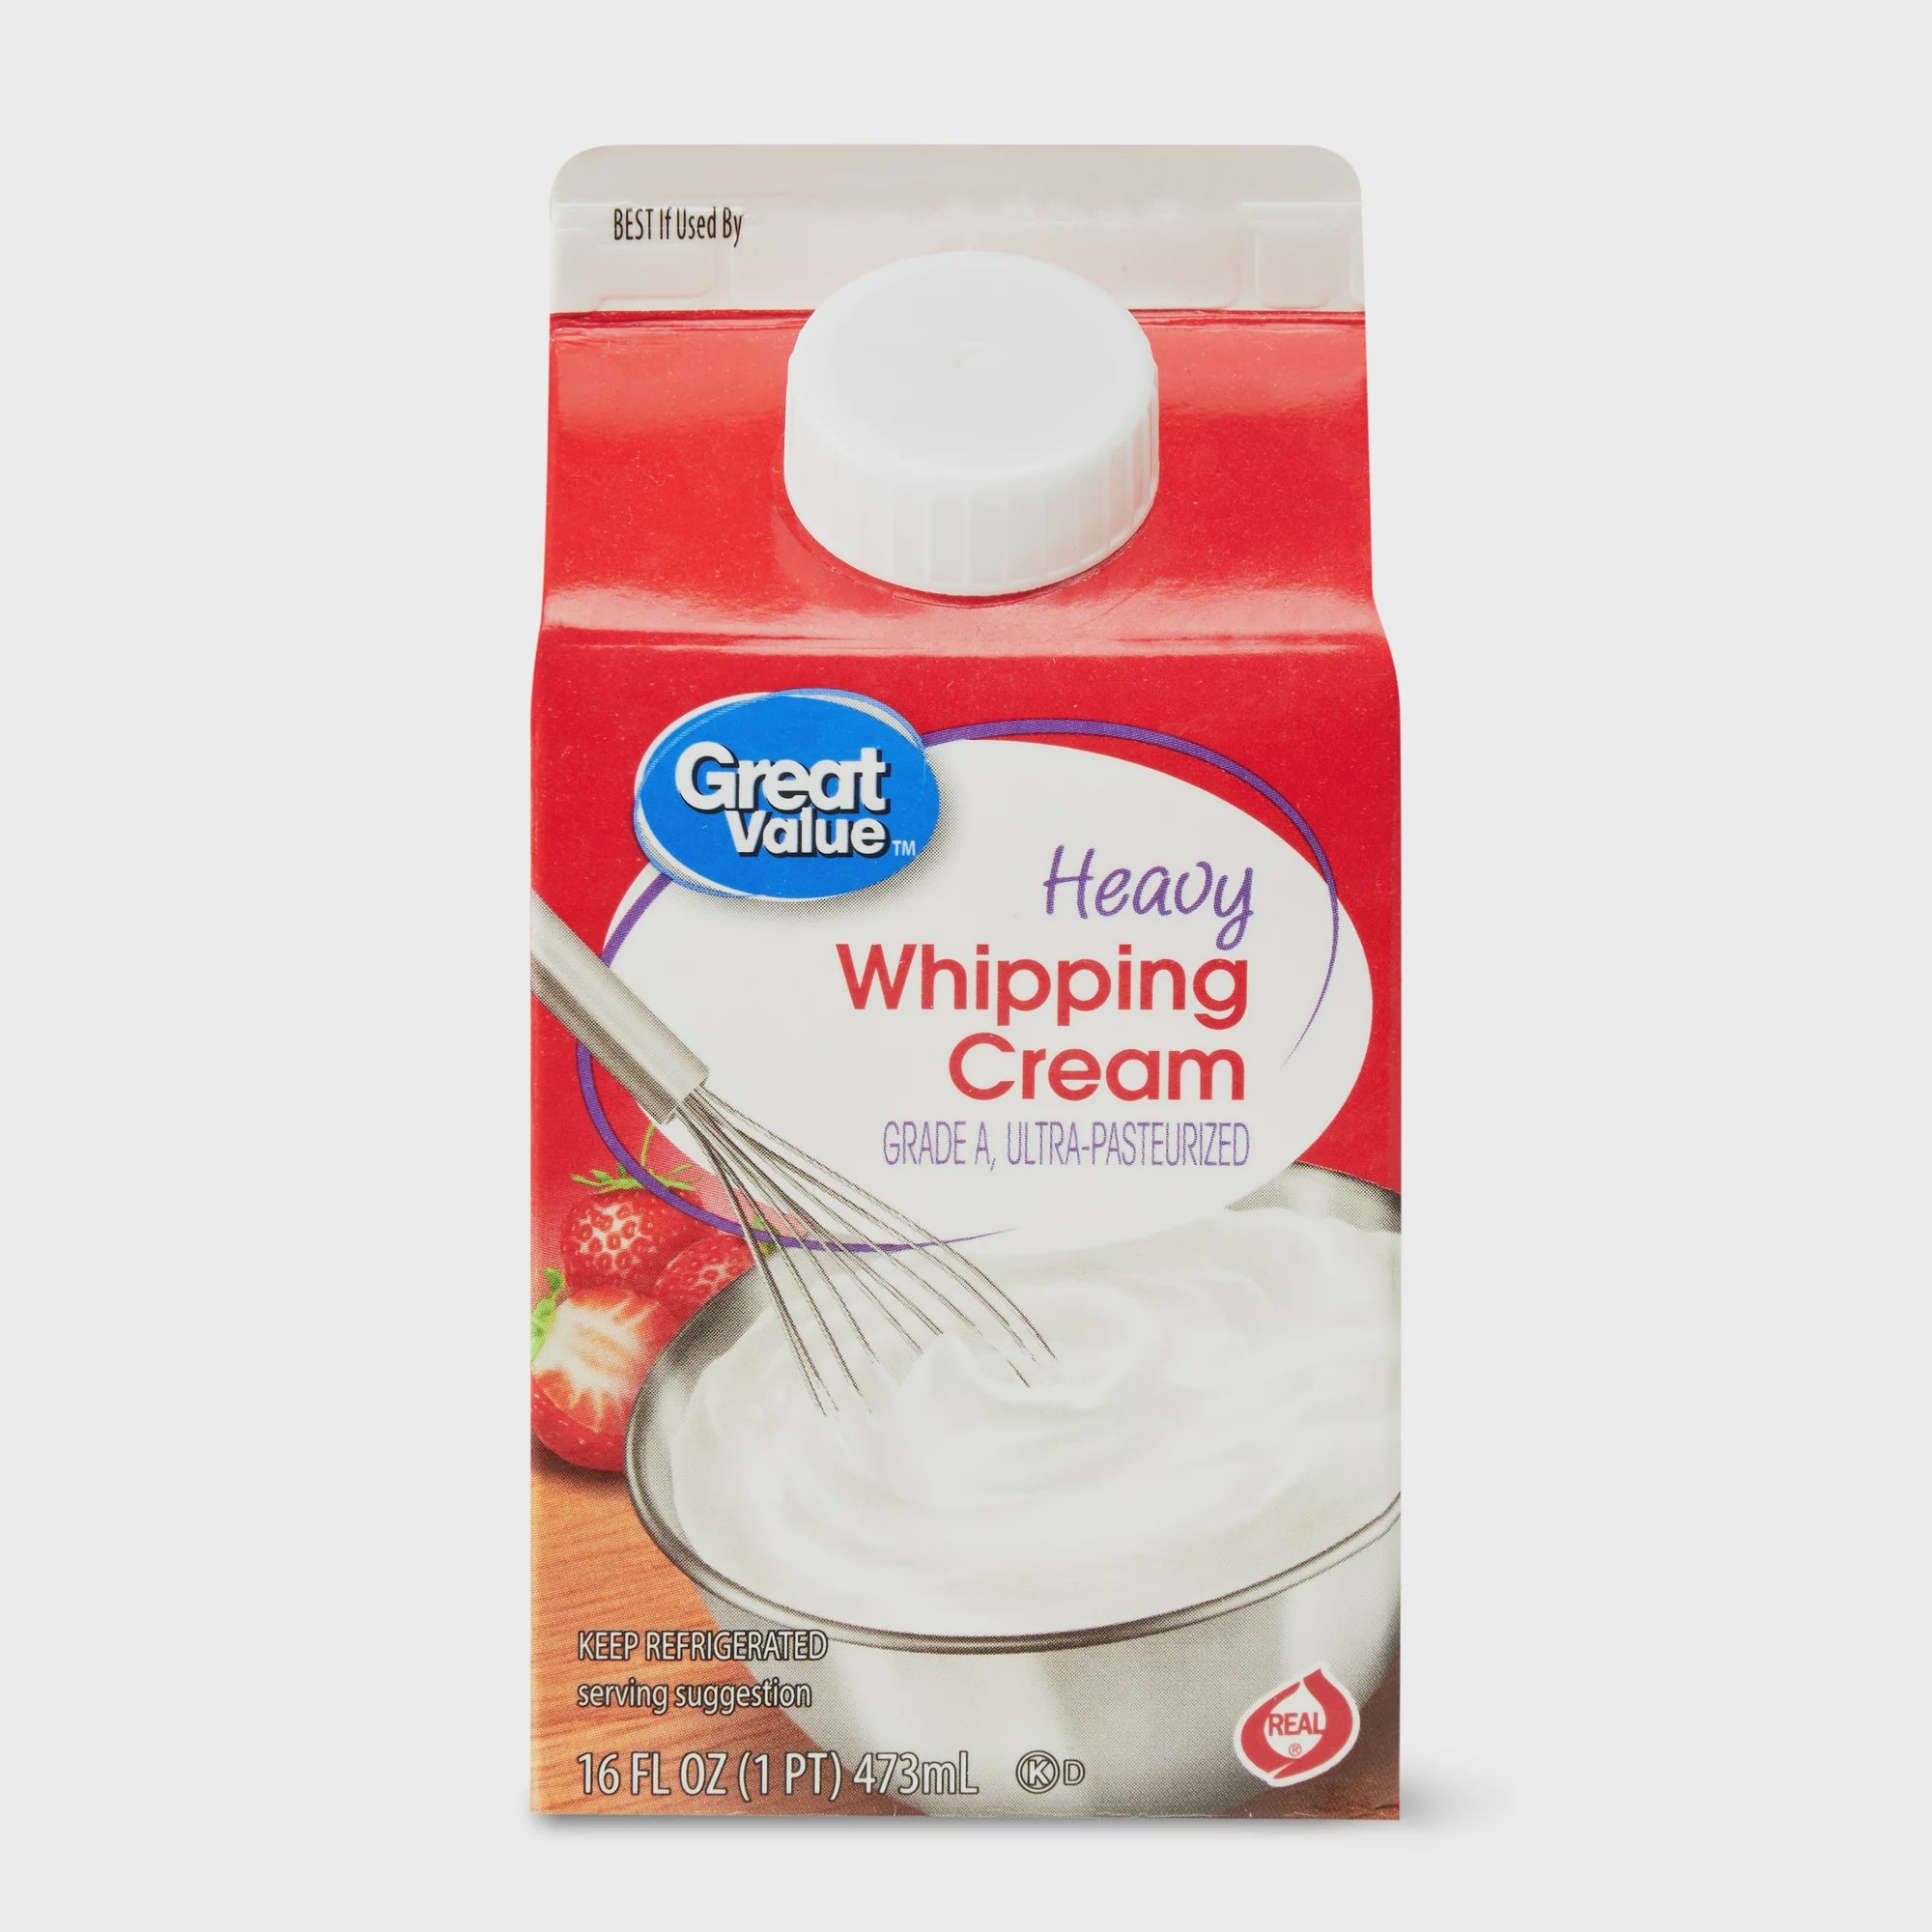 Great Value Heavy Whipping Cream, 16 oz